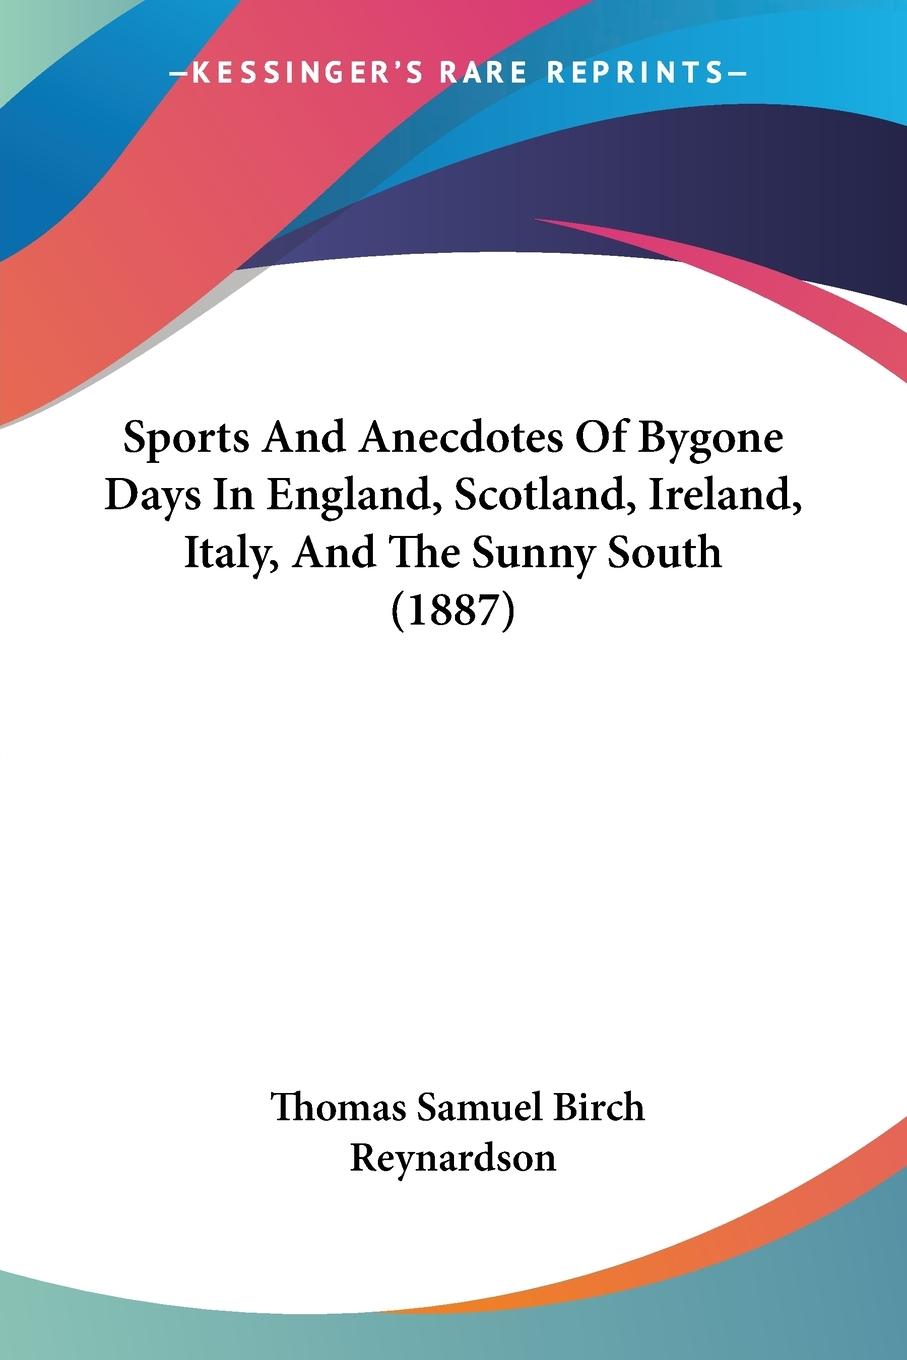 Sports And Anecdotes Of Bygone Days In England, Scotland, Ireland, Italy, And The Sunny South (1887) - Reynardson, Thomas Samuel Birch